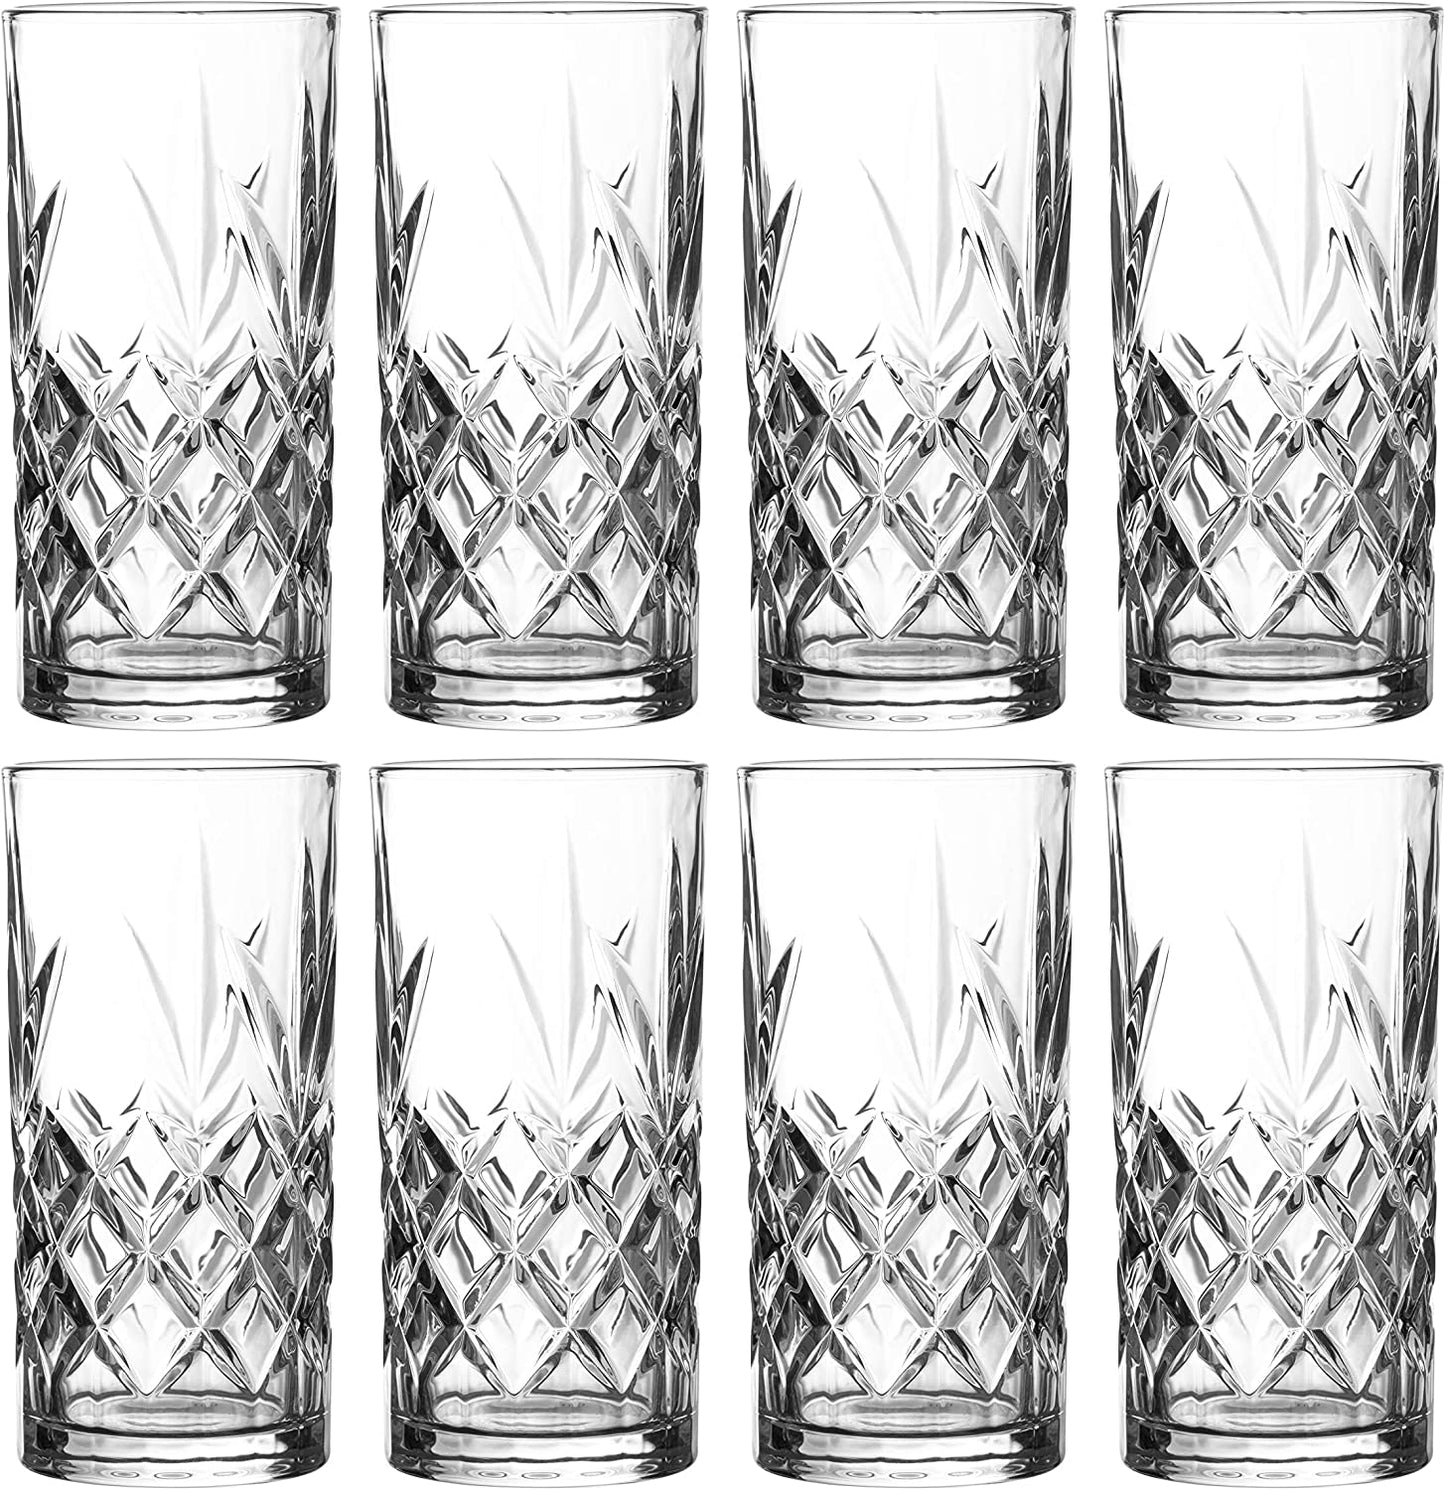 Kinsley Tall Highball Glasses Set of 8, 12 Ounce Cups, Textured Designer Glassware for Drinking Water, Beer, or Soda, Trendy and Elegant Dishware, Dishwasher Safe (Hiball)